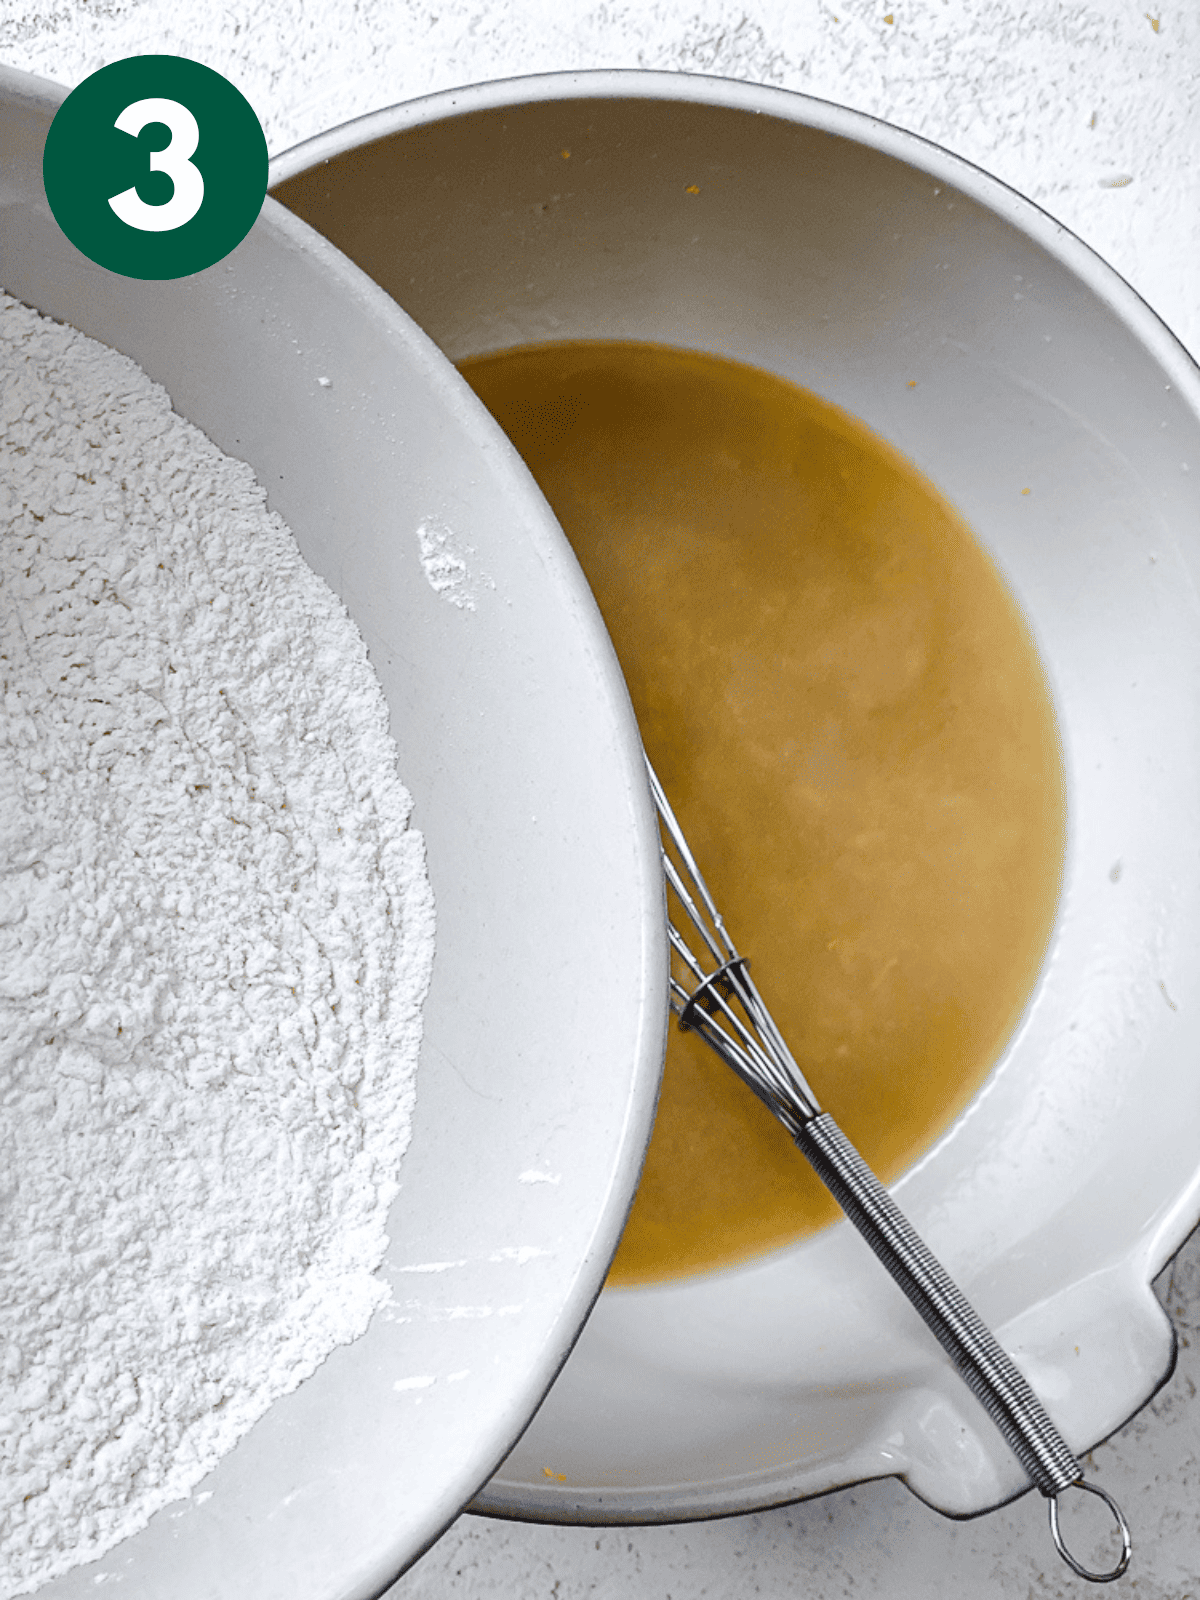 pouring flour into a wet cake batter mixture in a large white bowl.